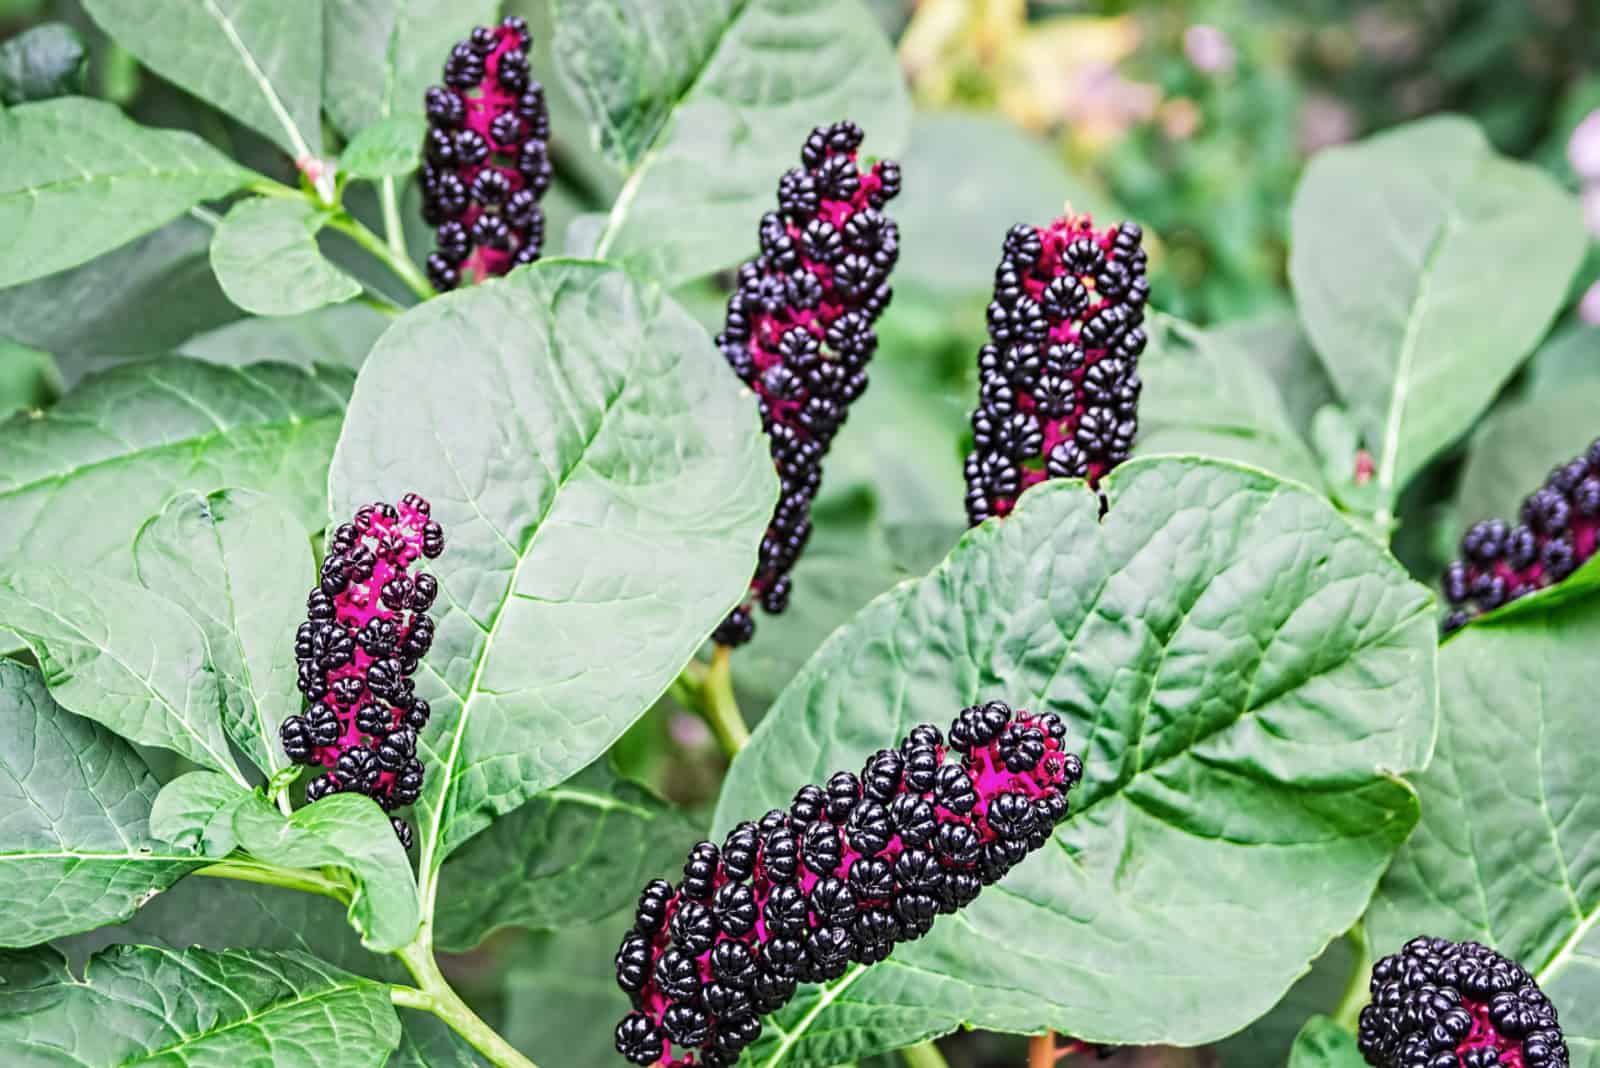 Pokeweed plant with ripe fruits